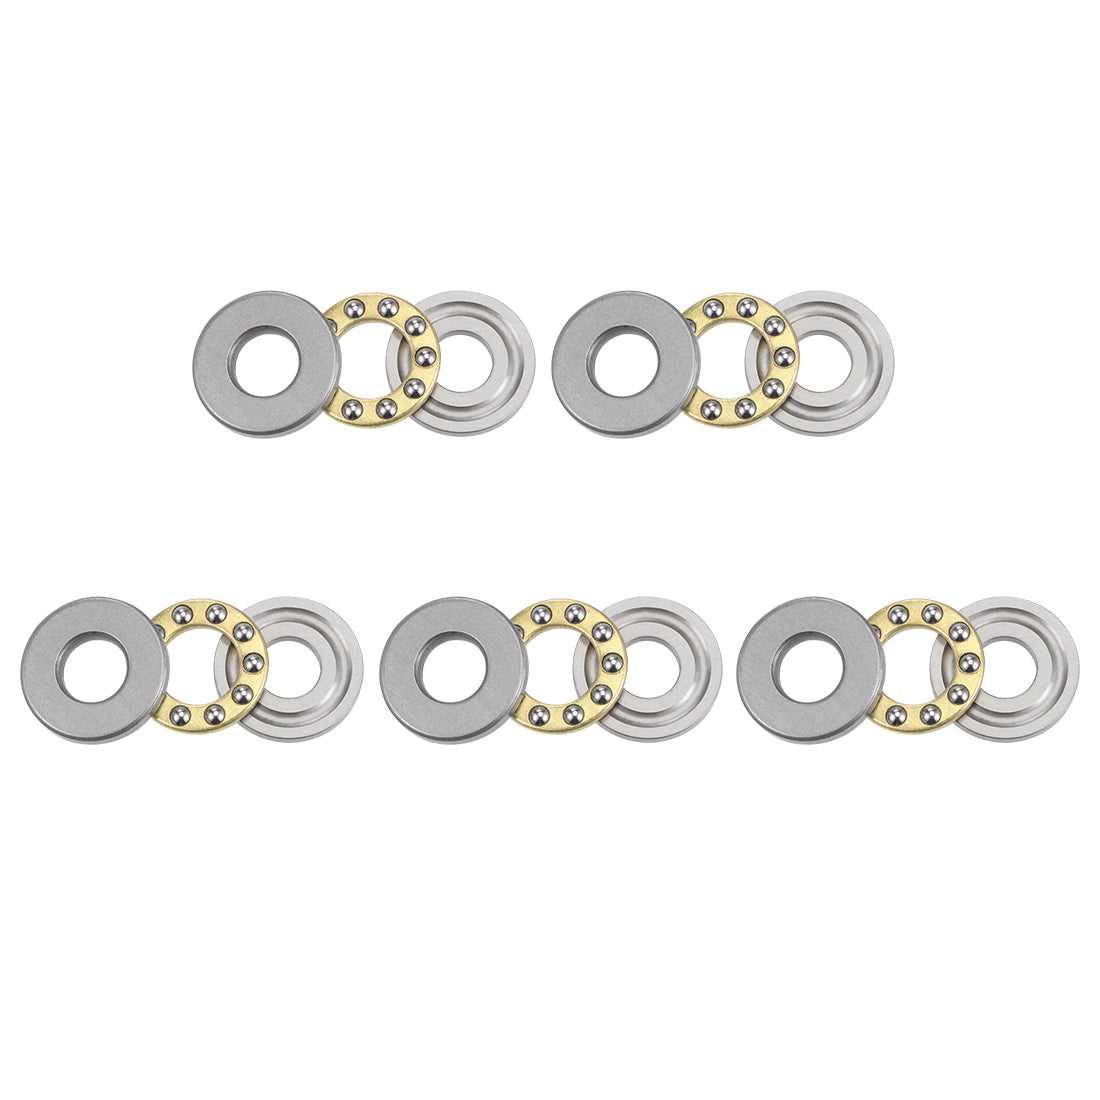 uxcell Uxcell F8-19M Miniature Thrust Ball Bearing 8x19x7mm Chrome Steel with Washer 5Pcs